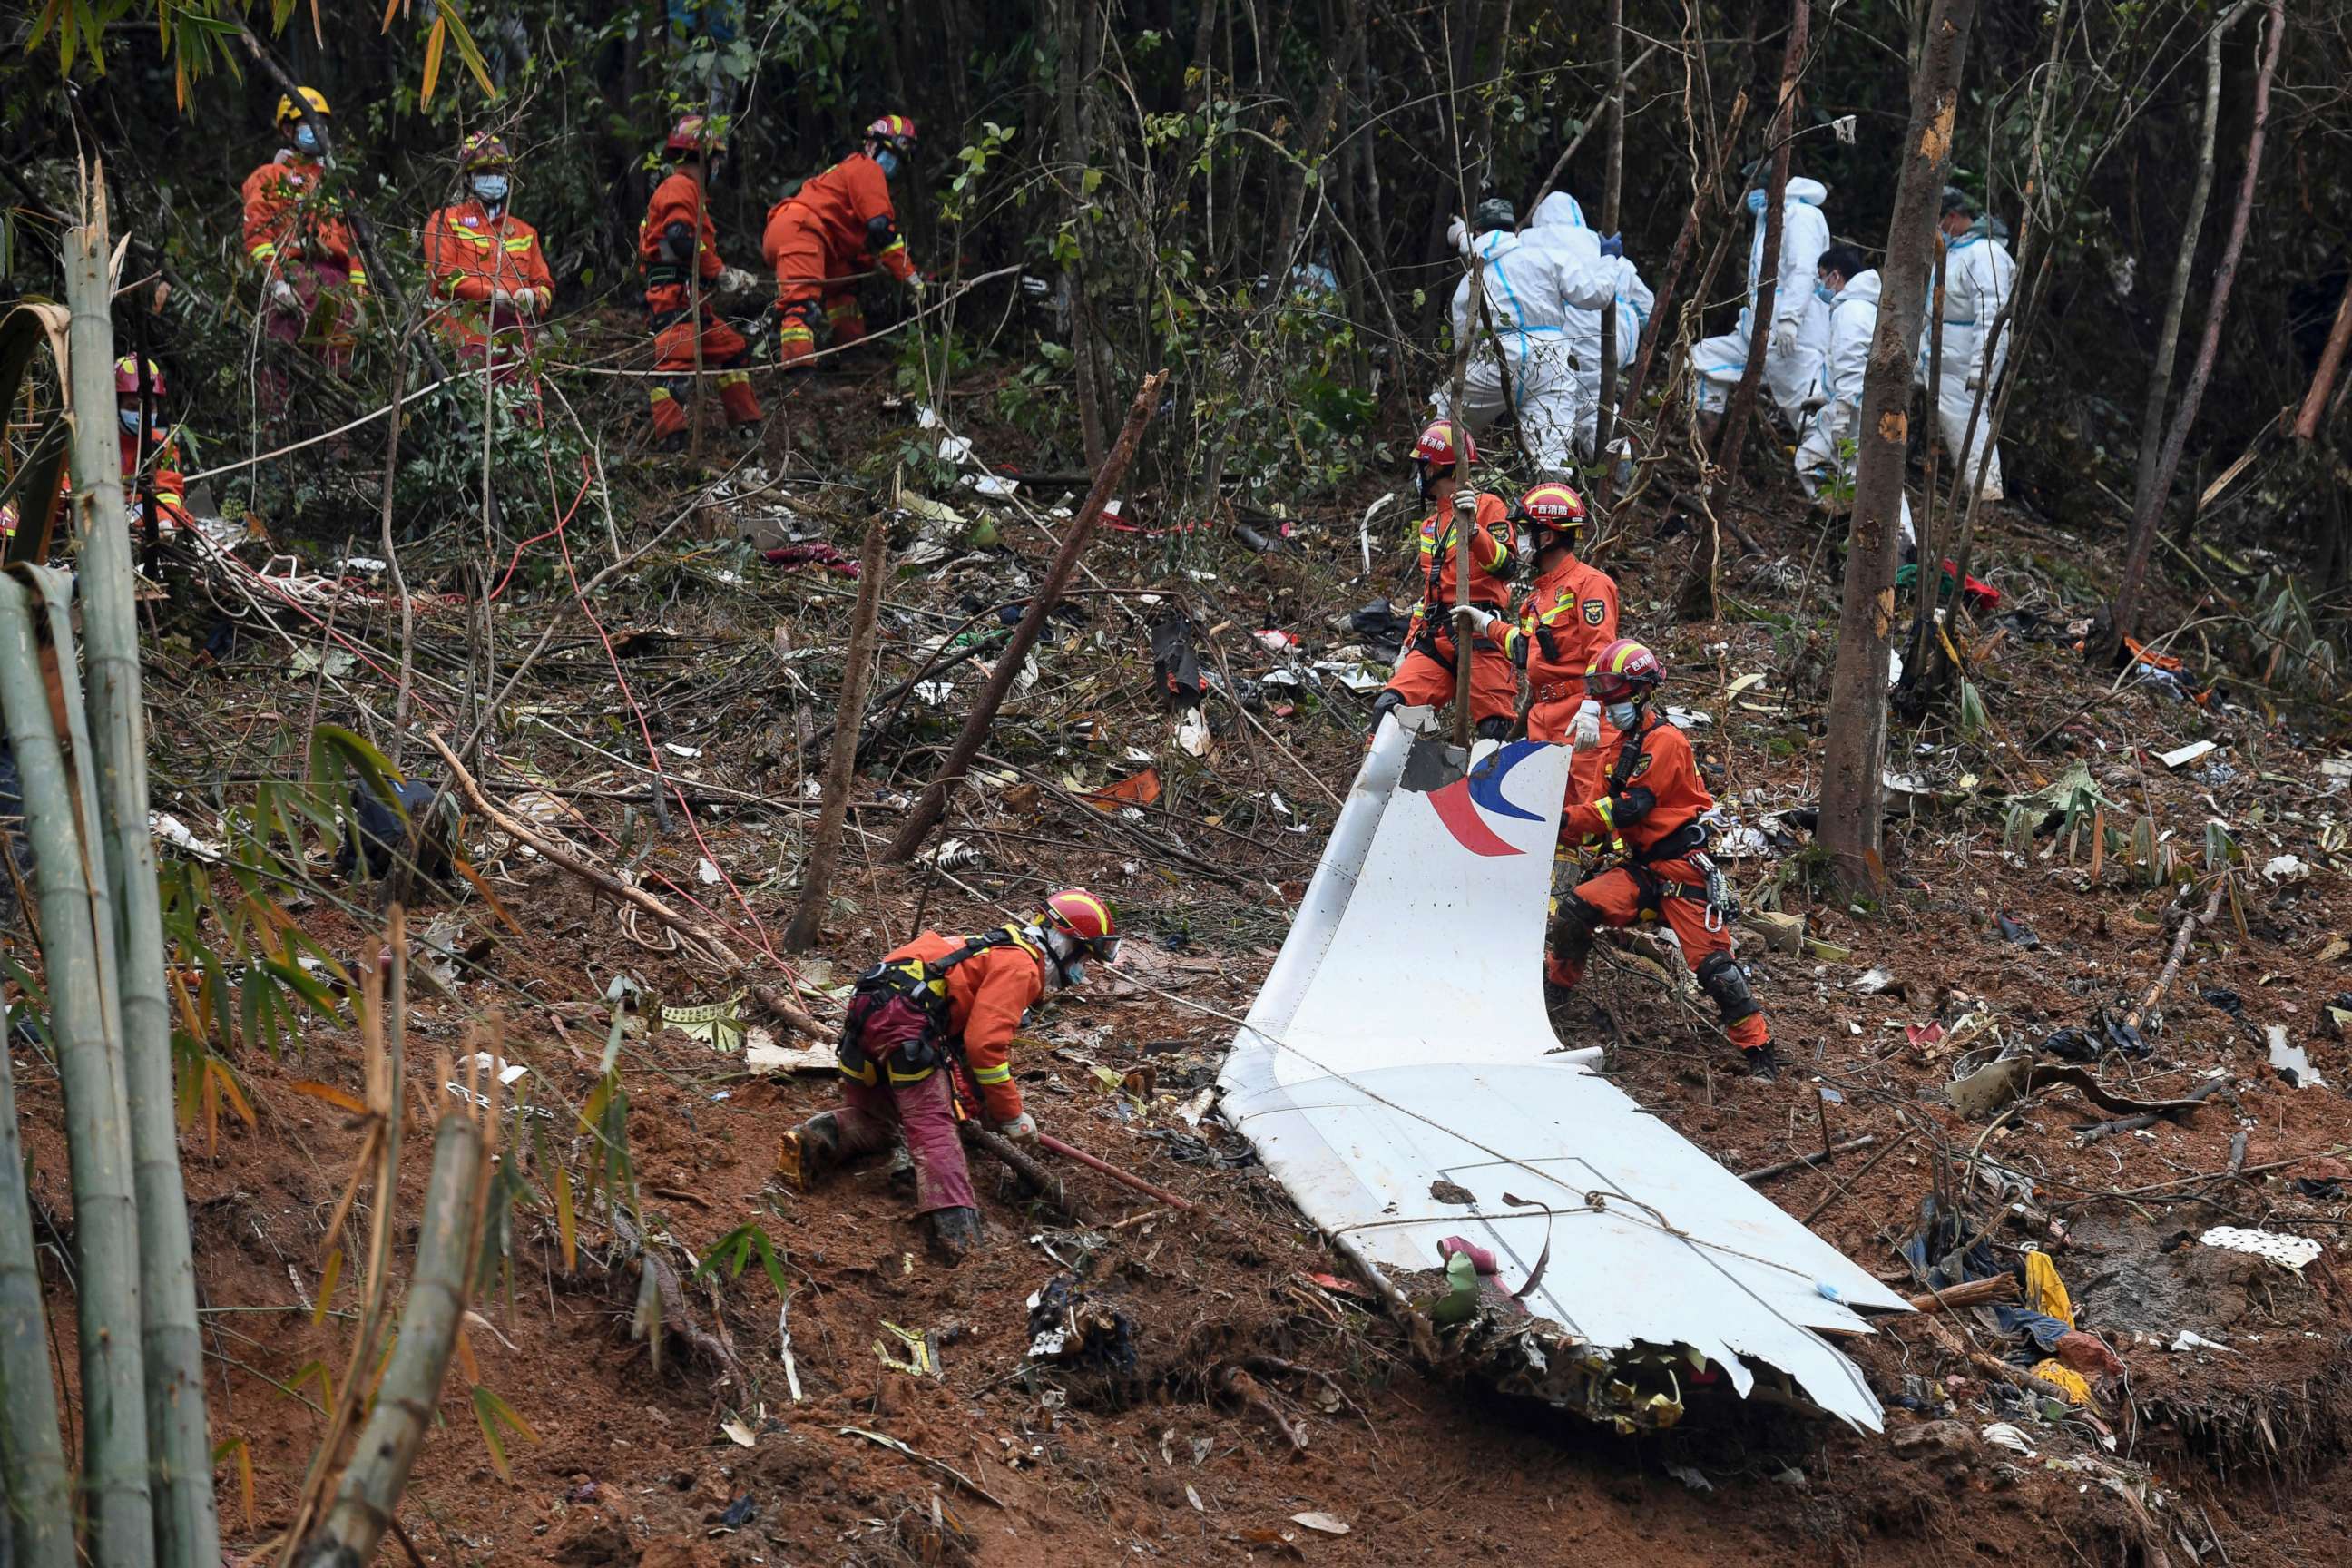 PHOTO: In this photo released by Xinhua News Agency, workers search through debris at the China Eastern flight crash site in Tengxian County in southern China's Guangxi Zhuang Autonomous Region, March 24, 2022.